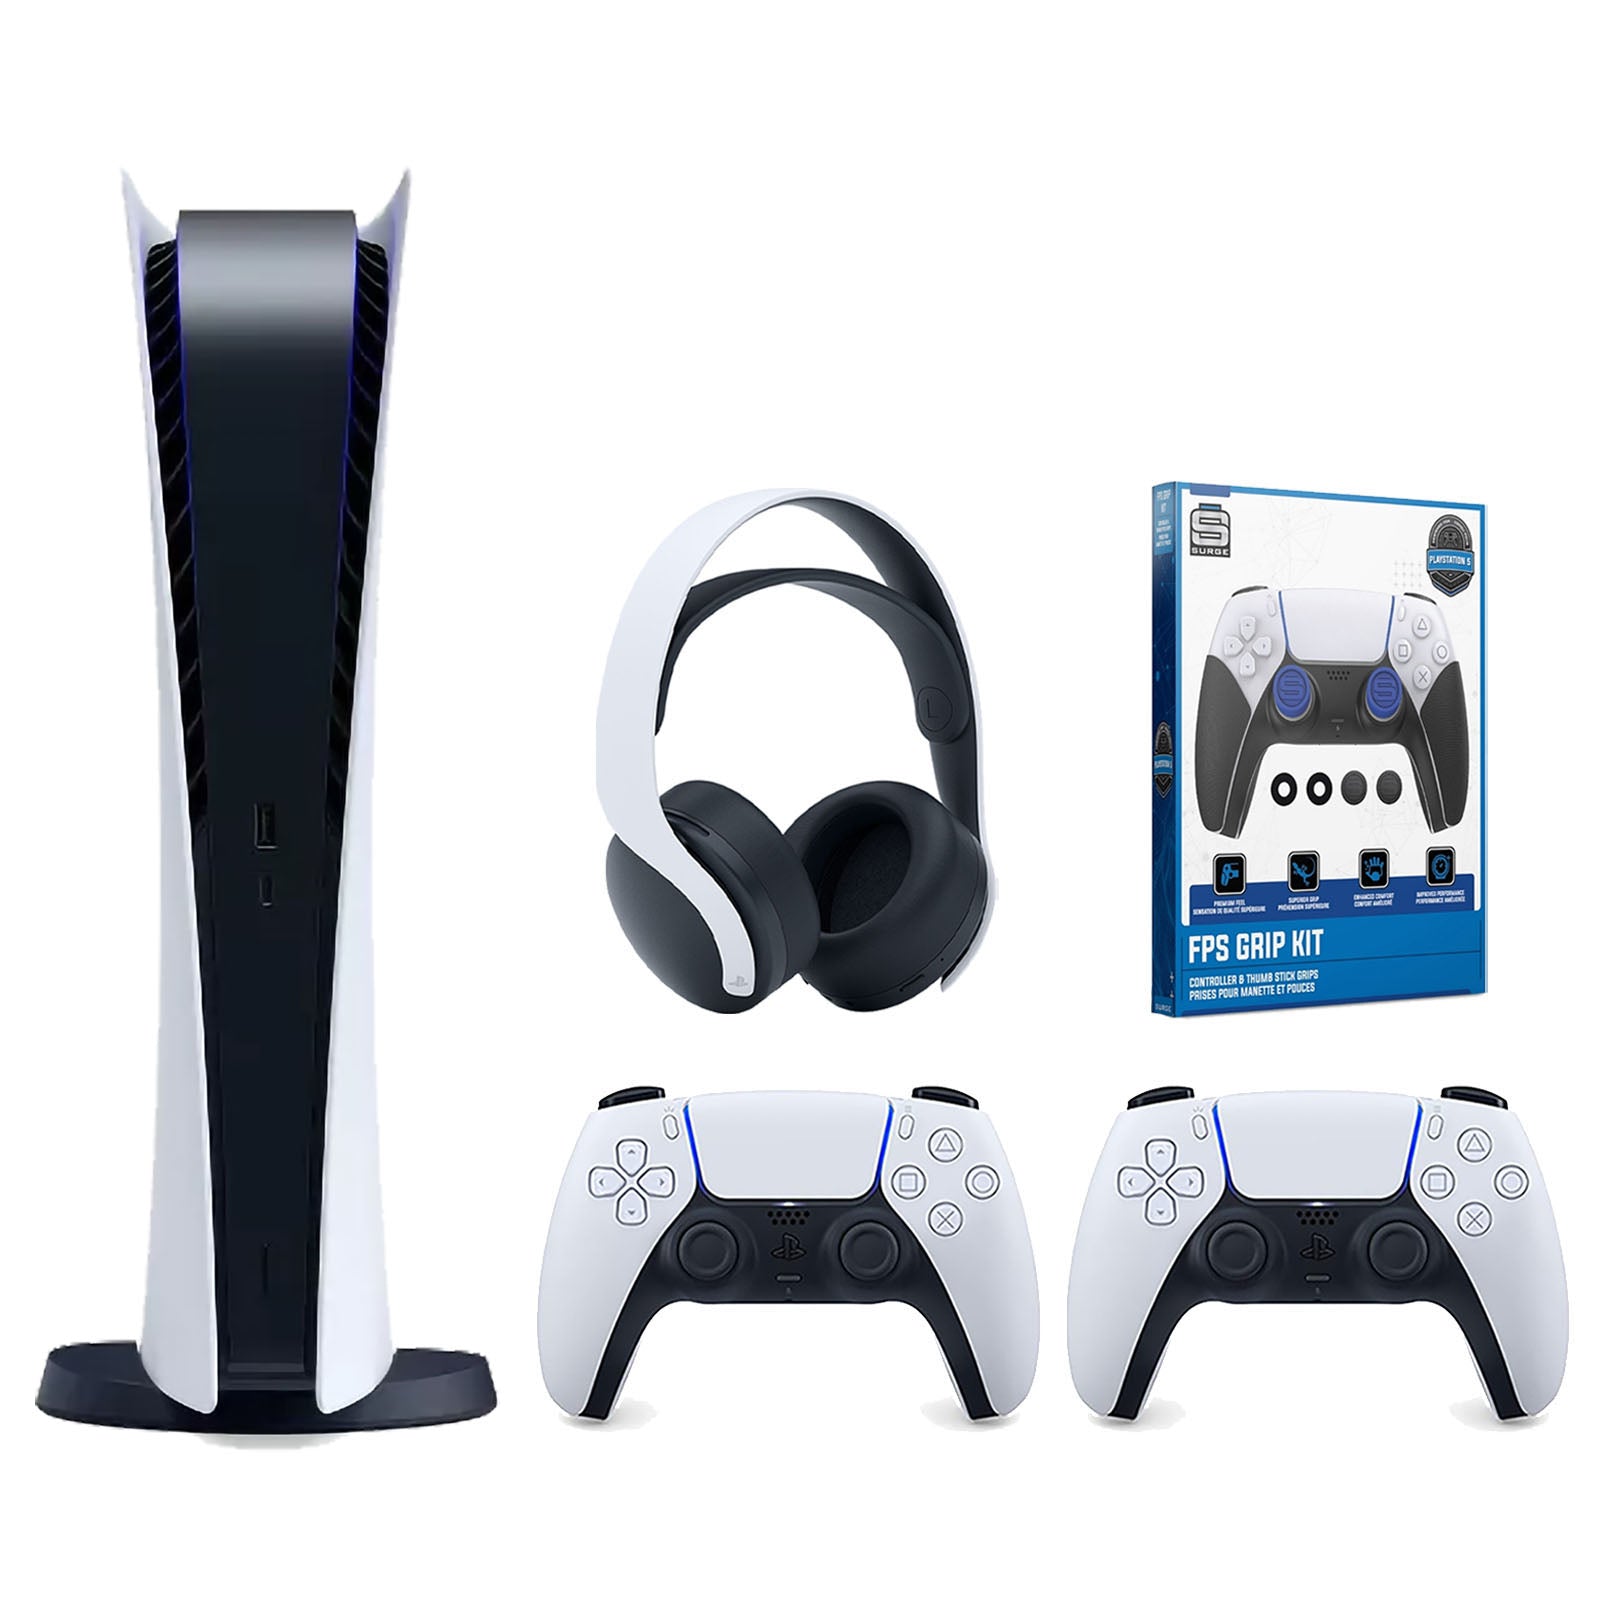 Sony Playstation 5 Digital Edition Console with Extra White Controller, White PULSE 3D Headset and Surge FPS Grip Kit With Precision Aiming Rings Bundle - Pro-Distributing